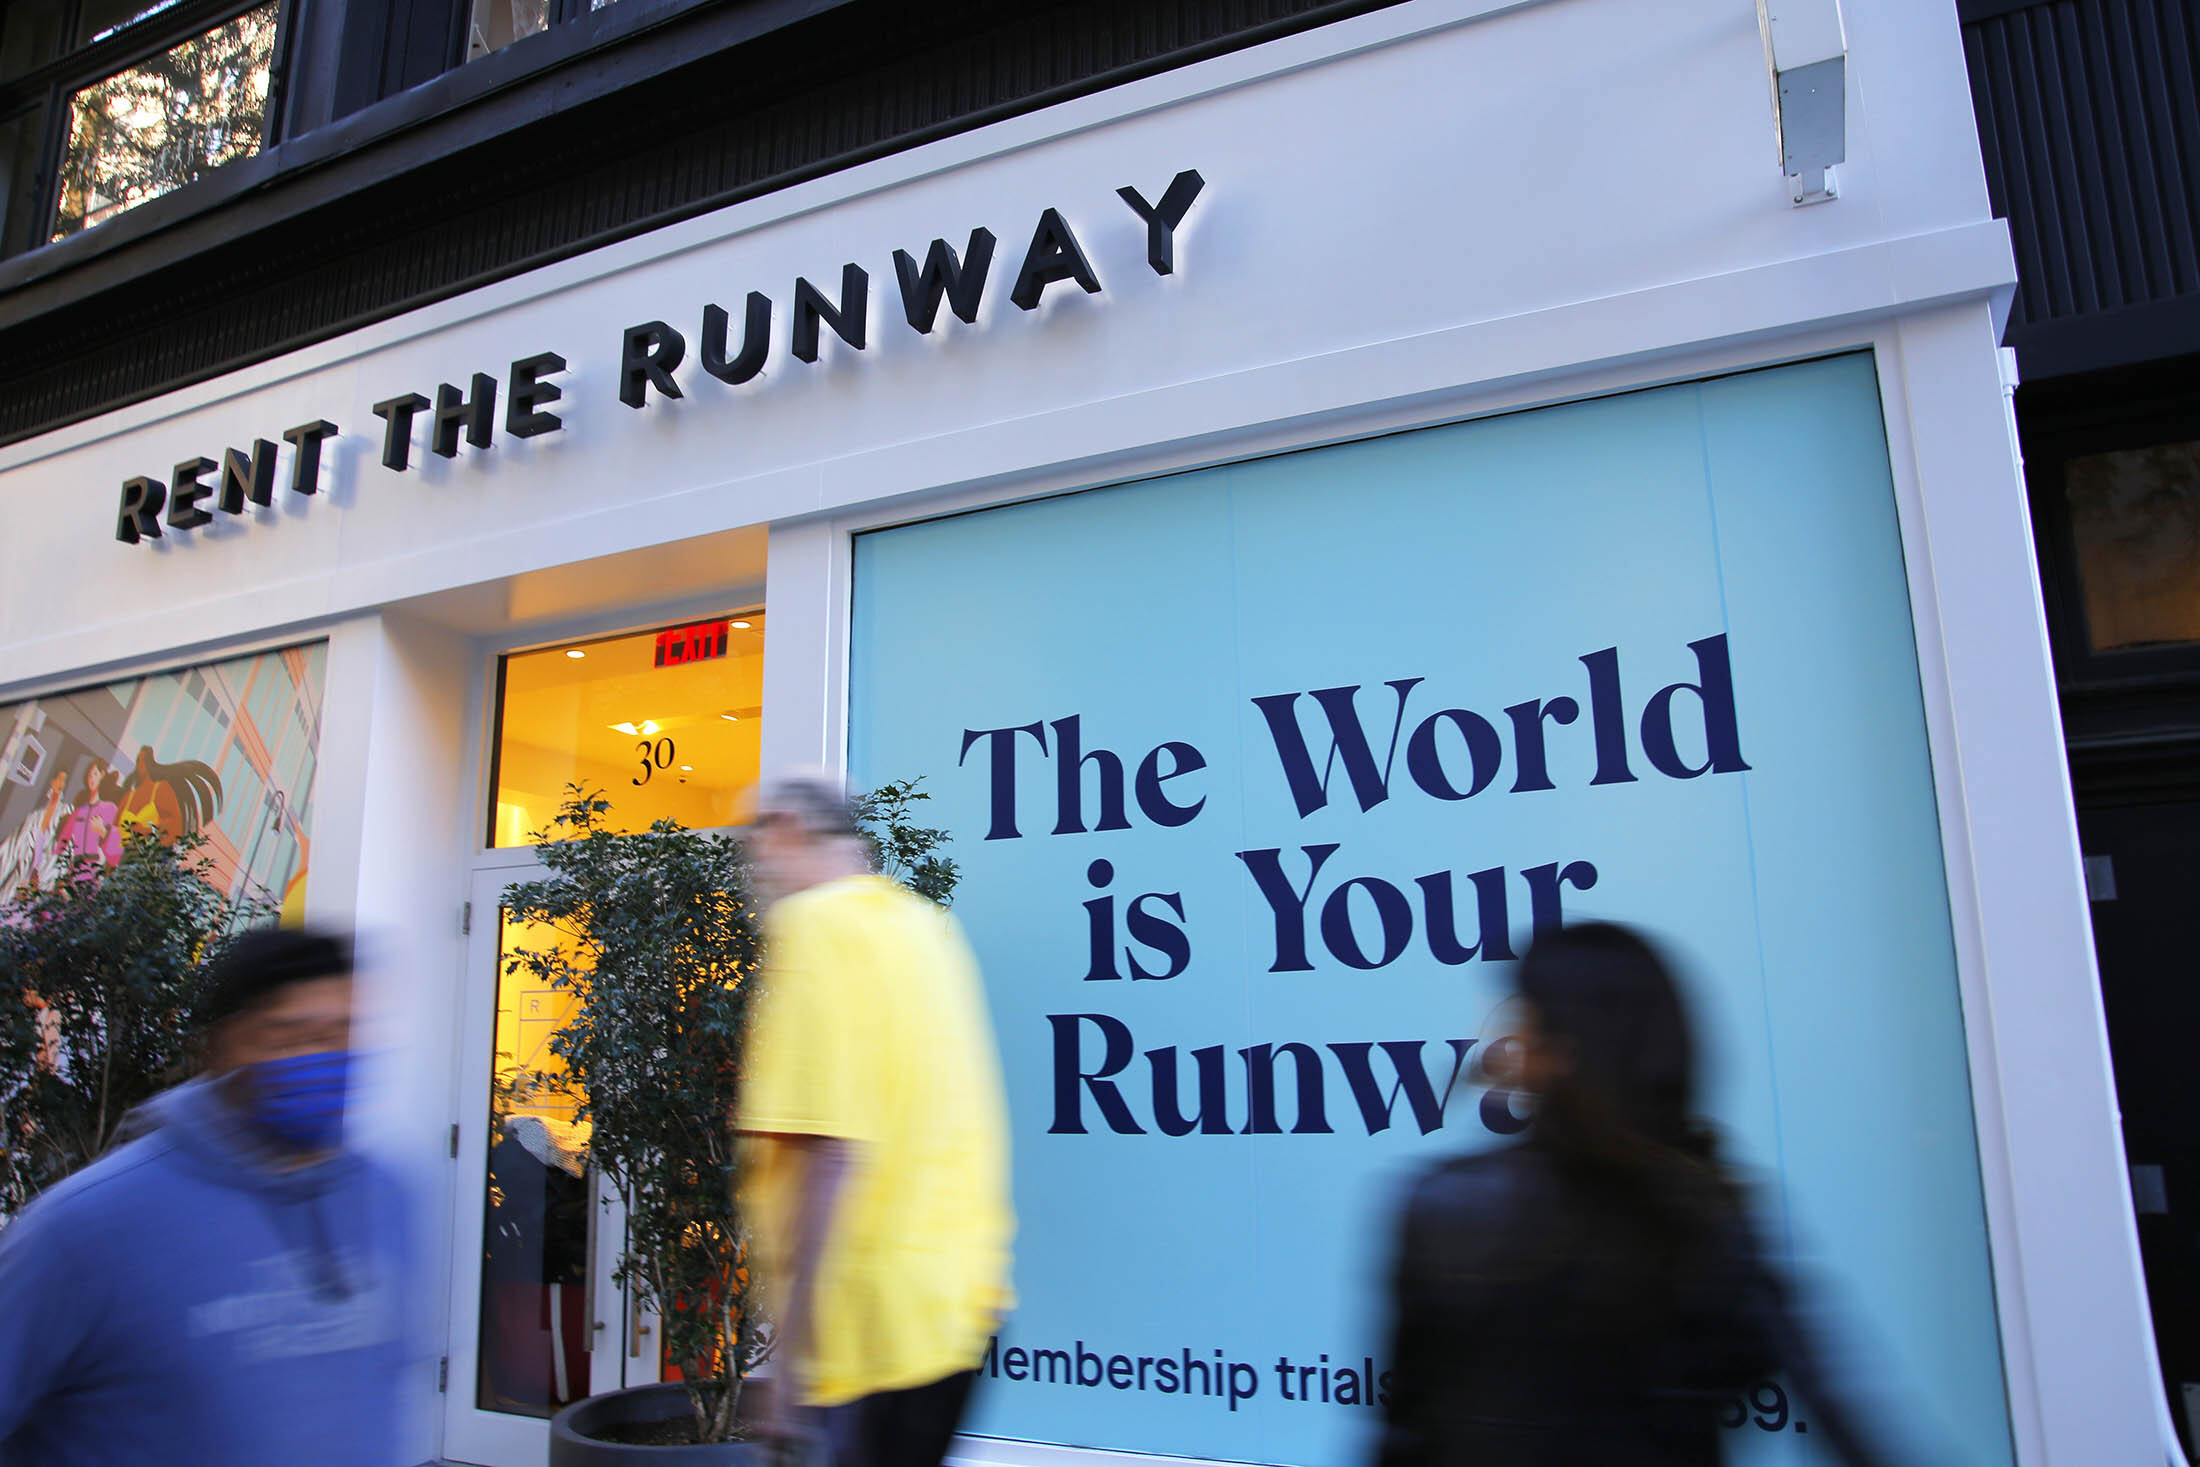 Designer Fashion Clothing Rental Company Rent the Runway Hits a Speed Bump  - Bloomberg